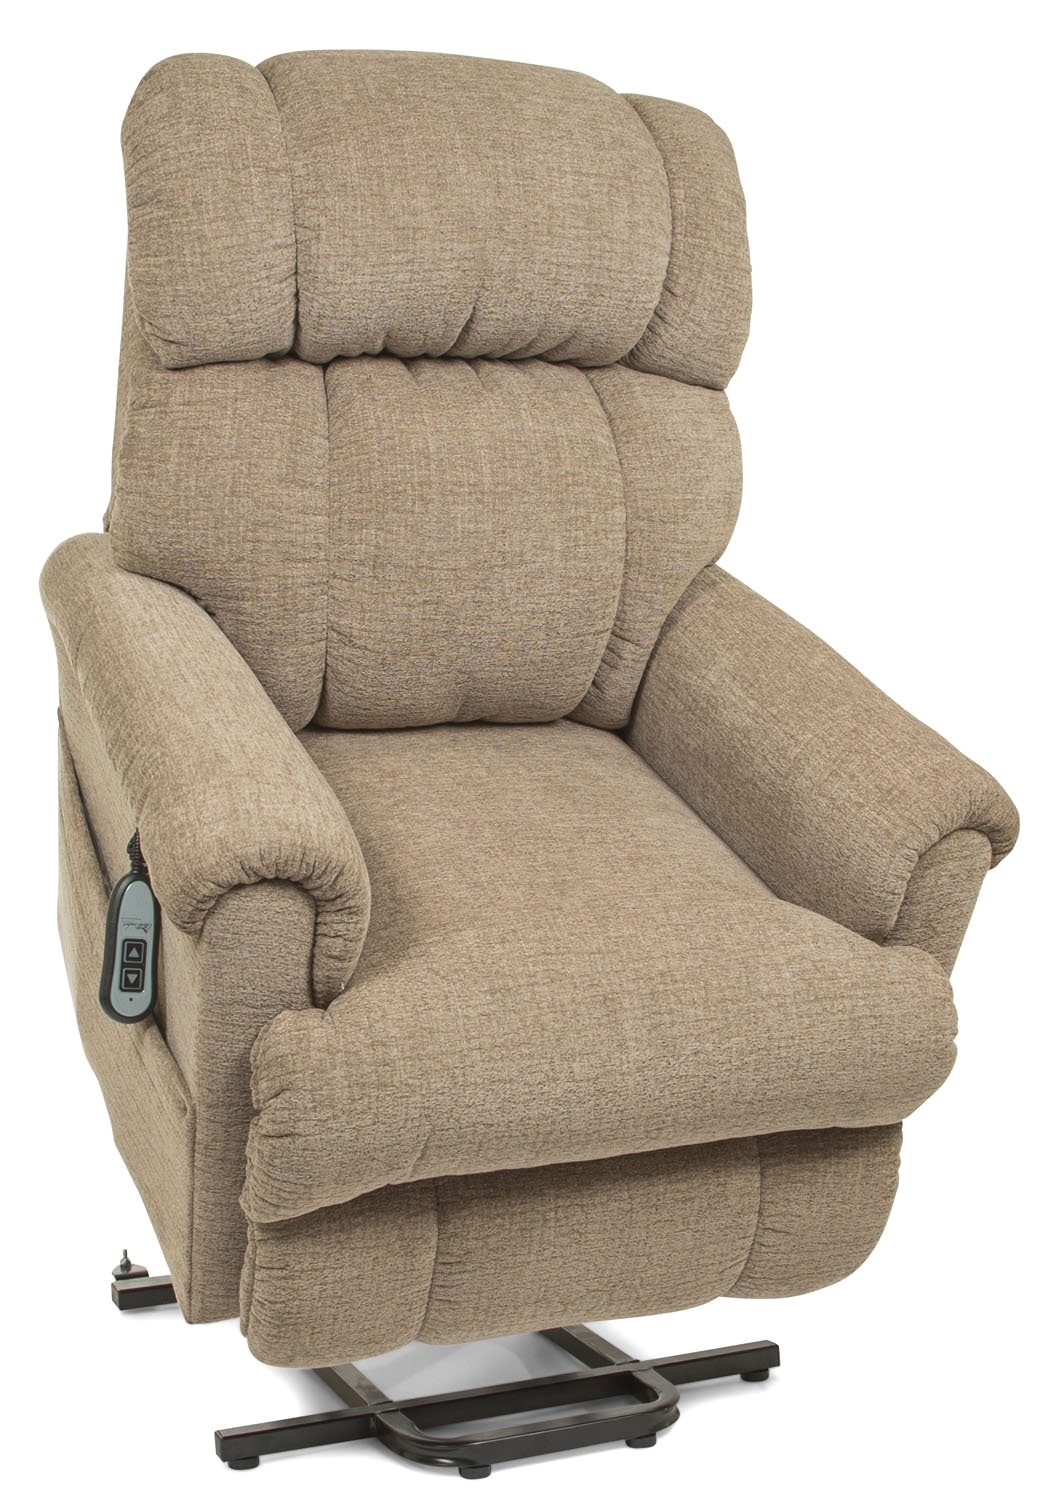 Best Rated Recliner Lift Chairs Space Saving Recliners Recliner and Lift Chairs Lift and Massage